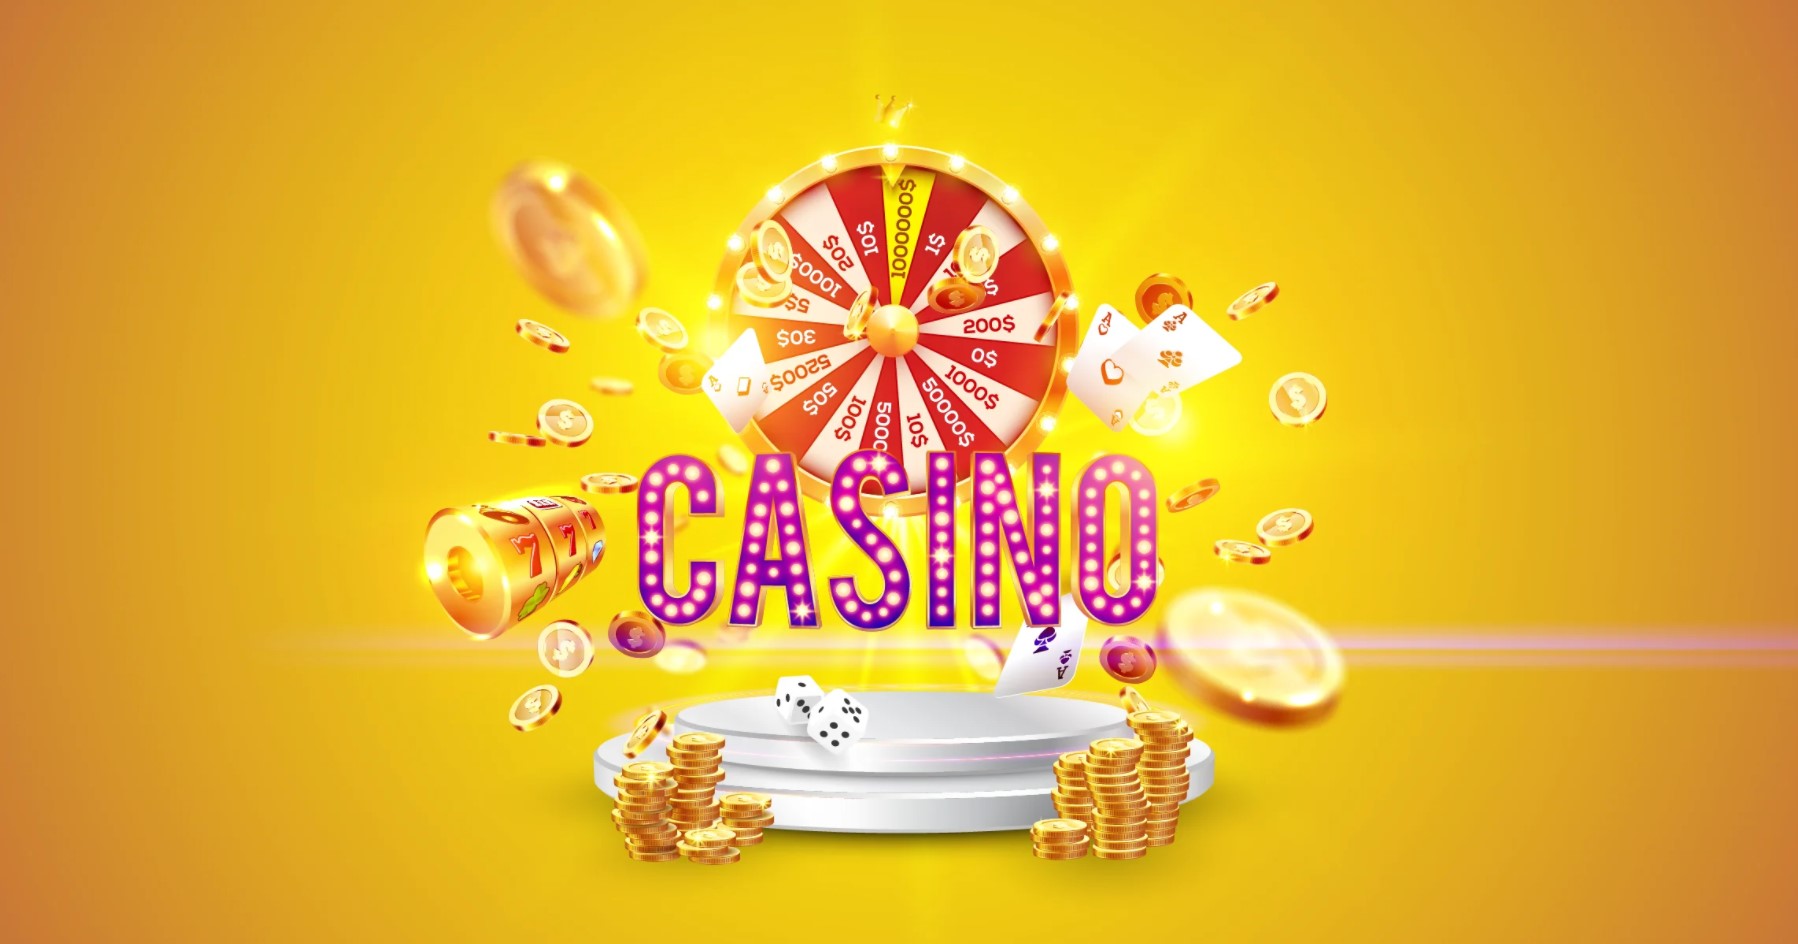 Take a peek inside to learn the best online casino games to start with at Joe Fortune